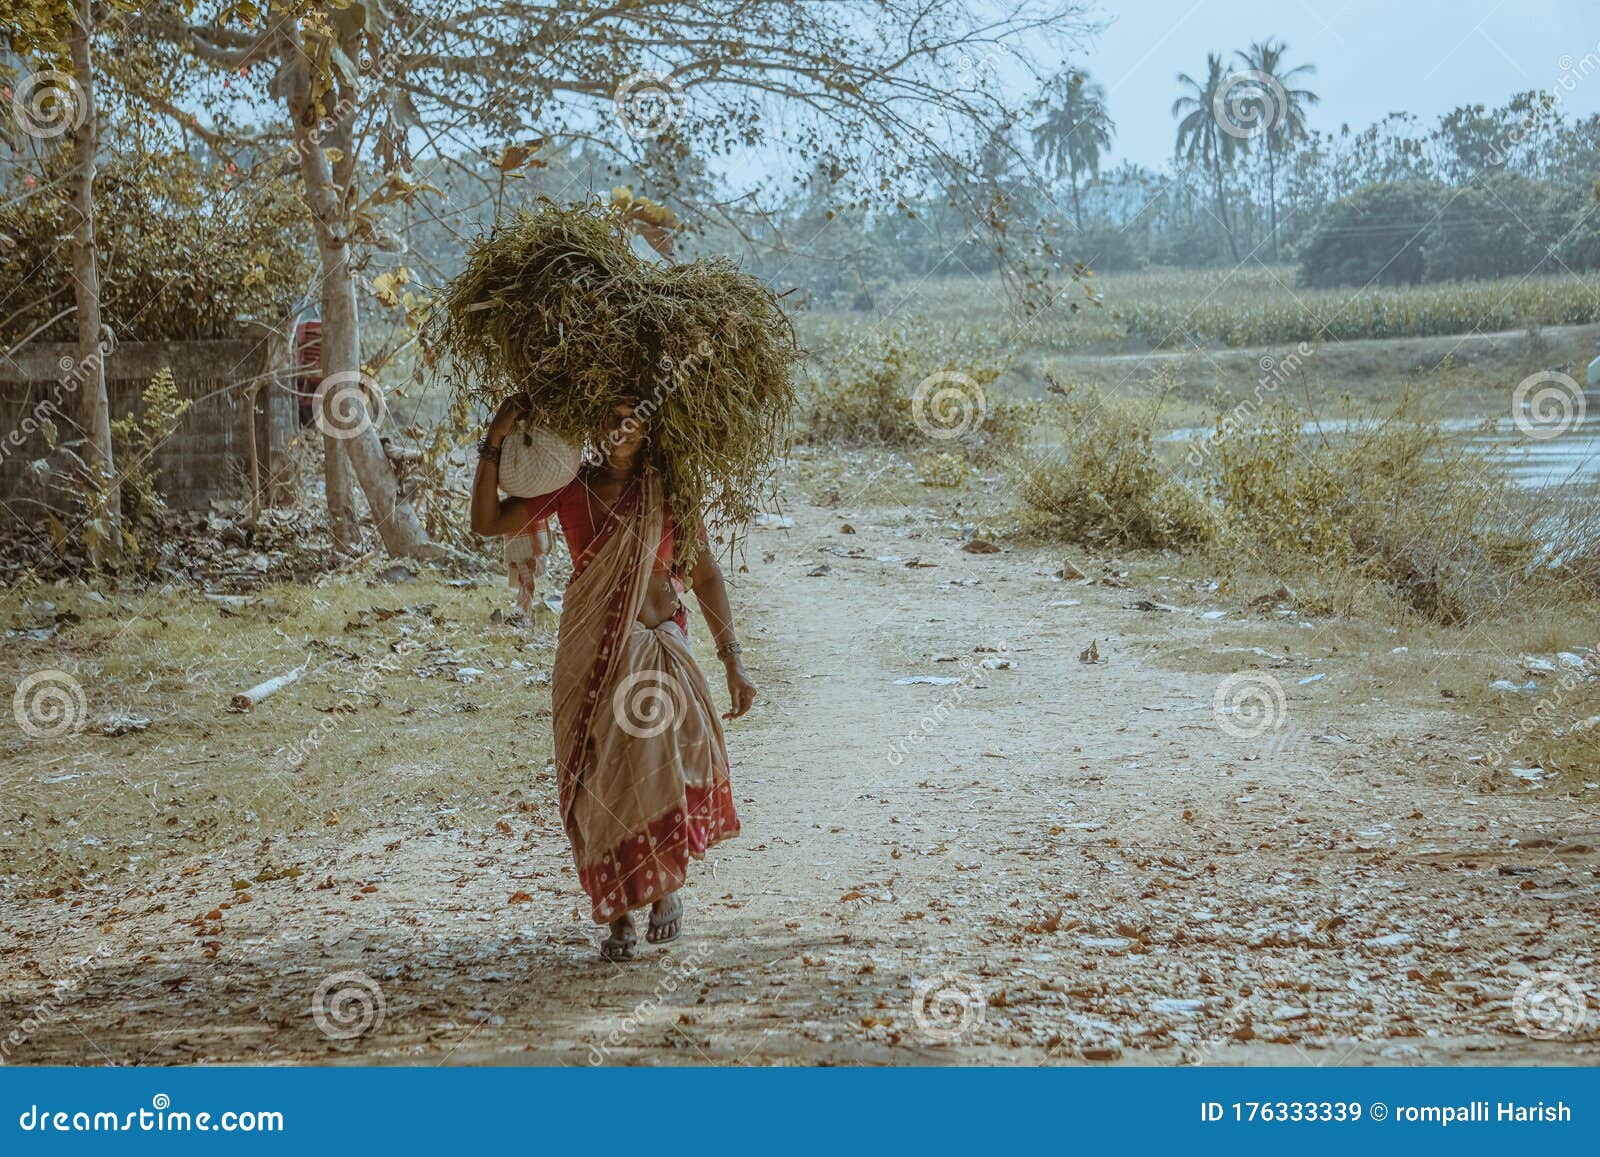 Indian Village Old Couple Indian Village Old Couple Editorial Stock Image Image Of Farming 